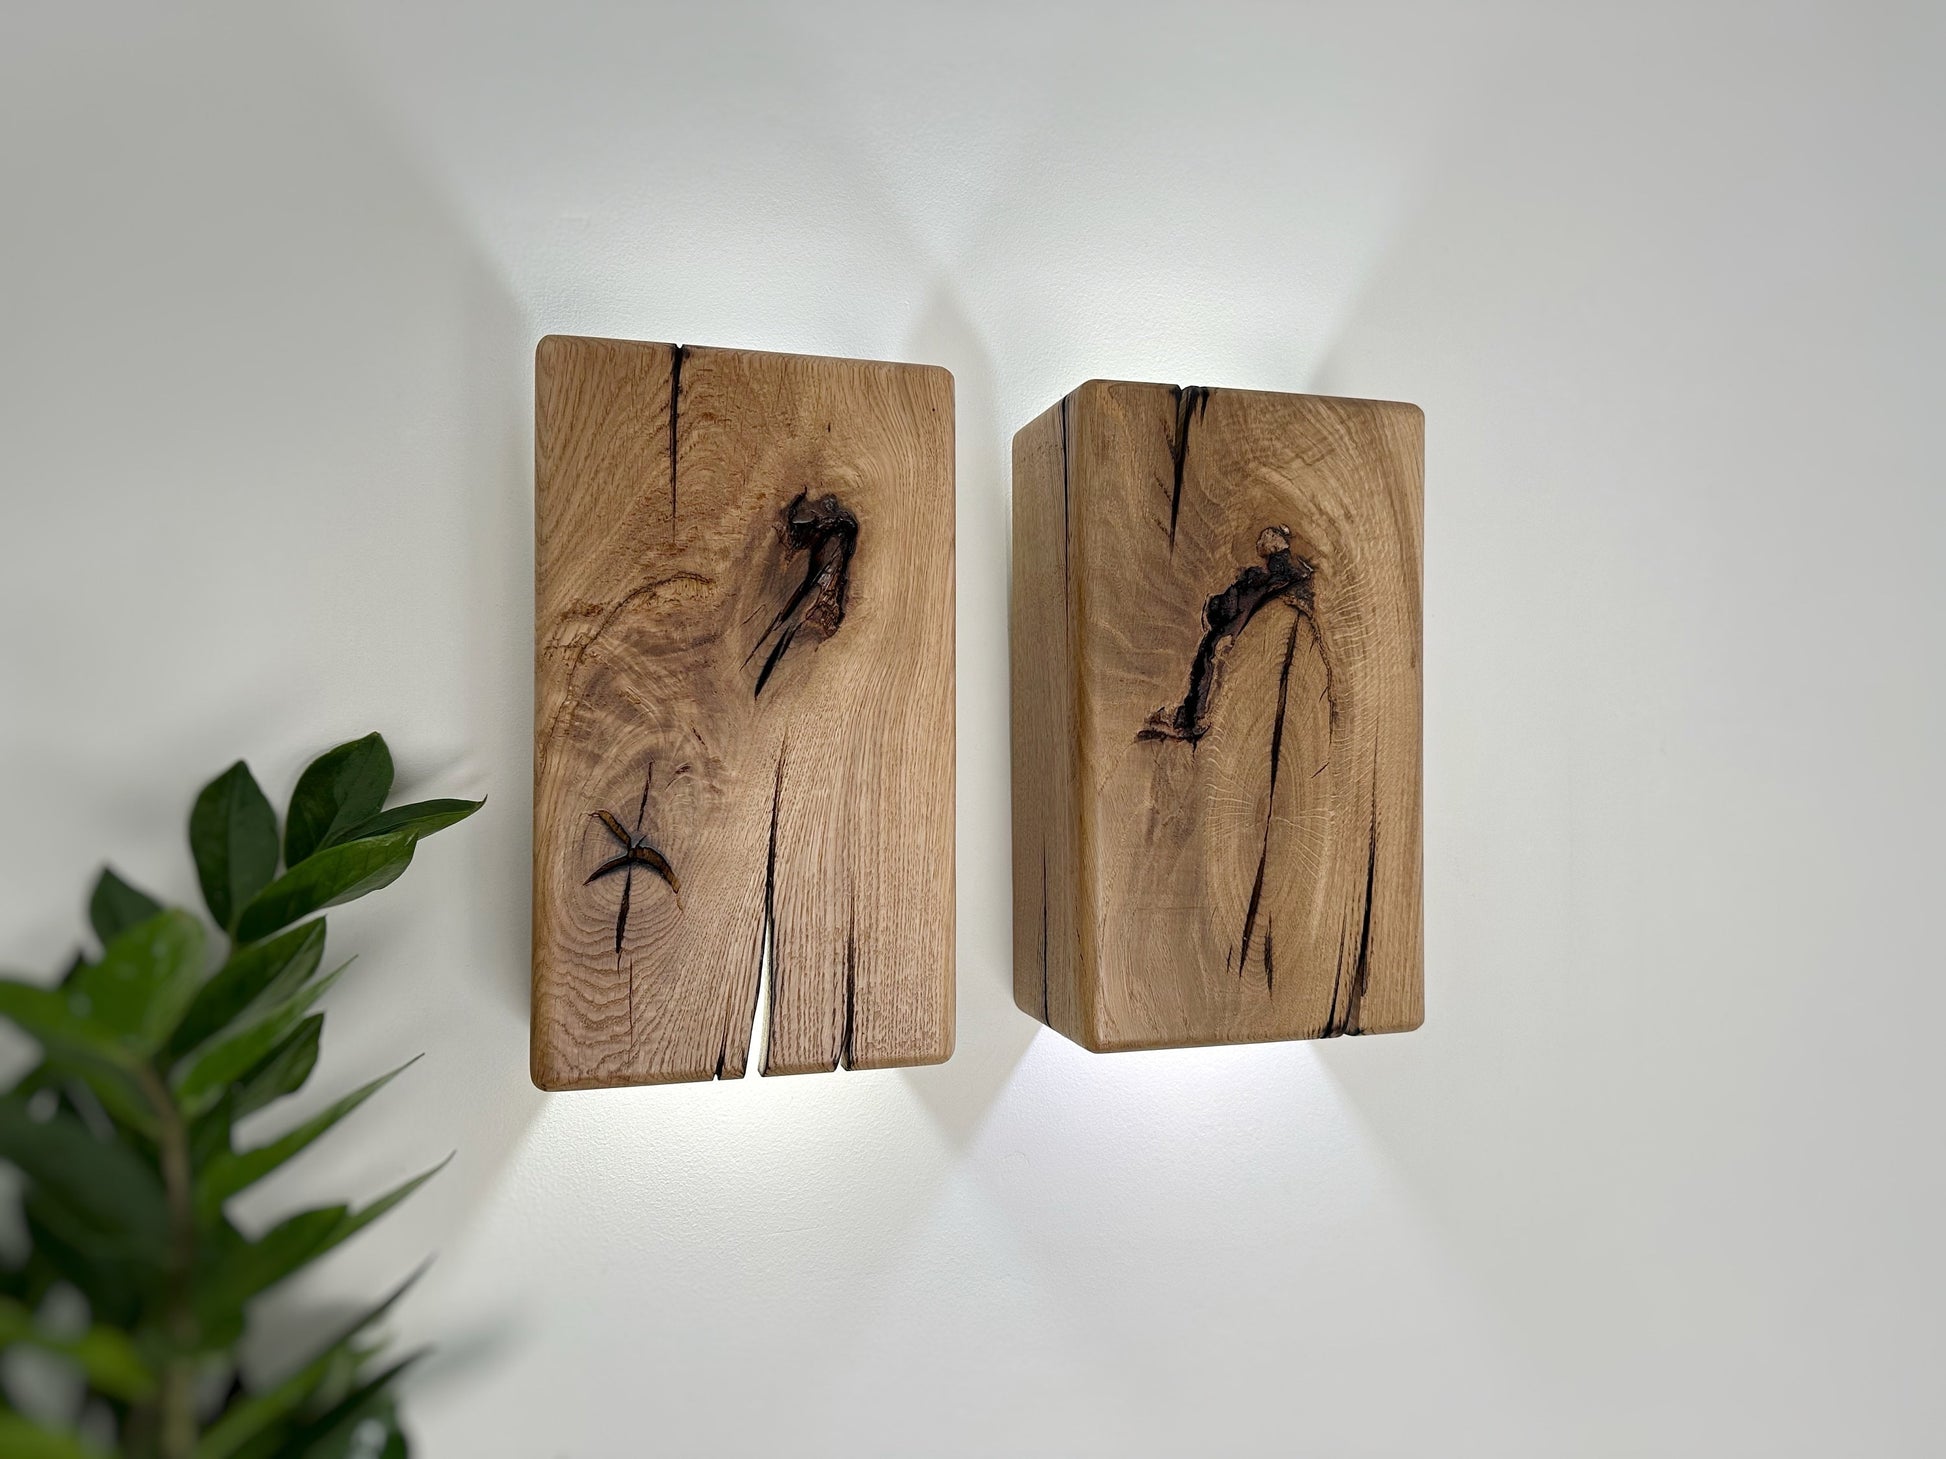 Handmade wood plug in wall sconce, with switch fixture or for battery operated bulbs, custom size wood wall lamp,lampshade, above bed decor